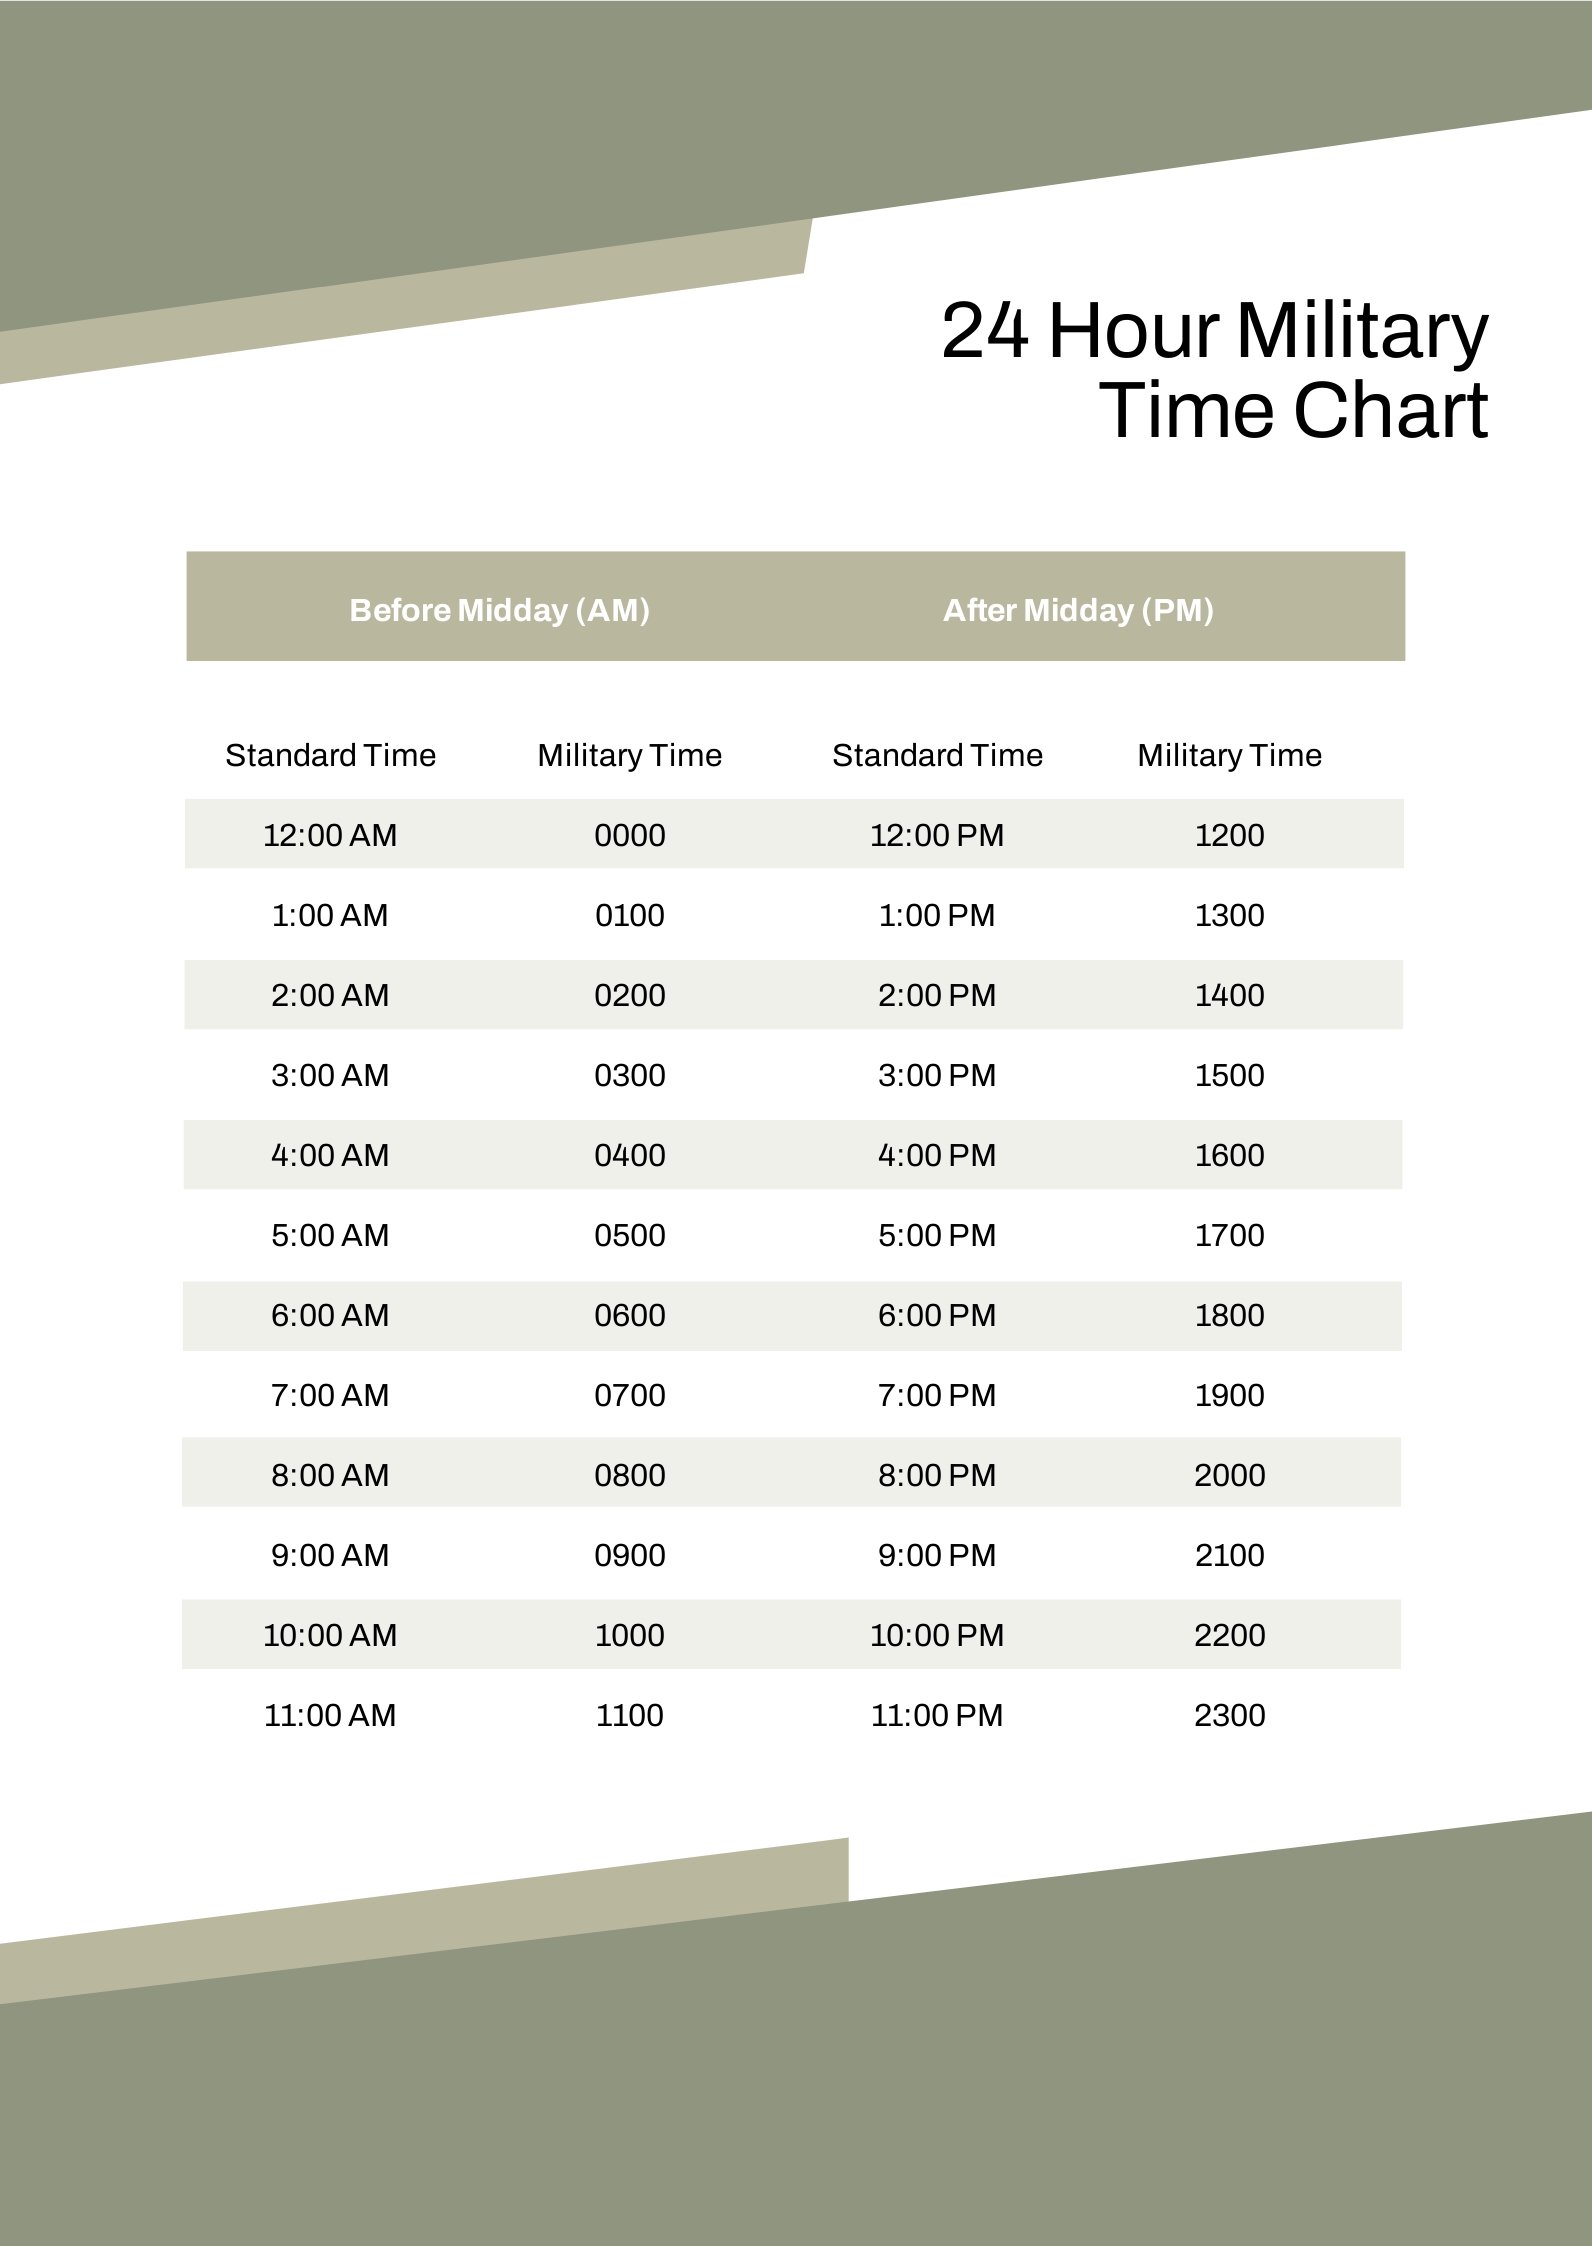 24 Hour Military Time Chart in PDF